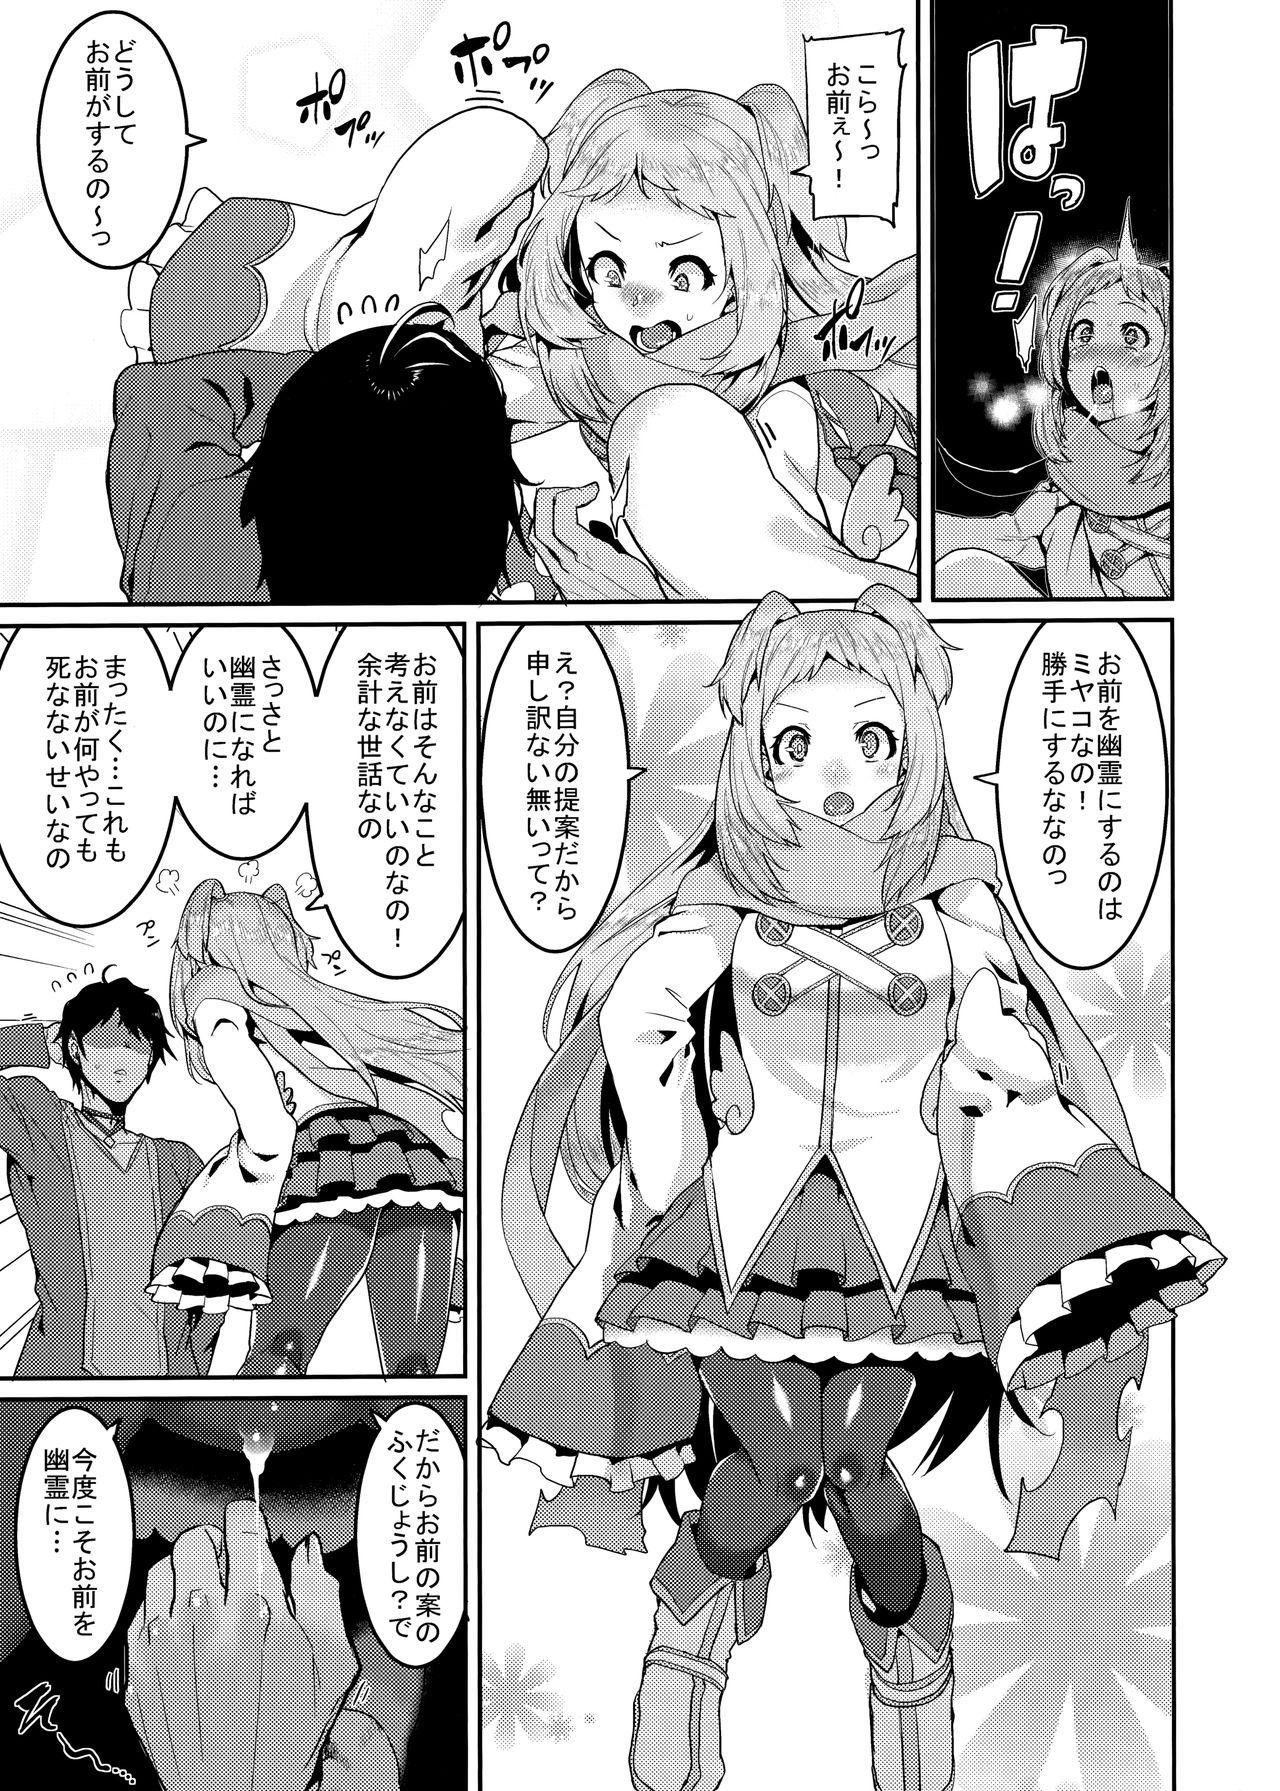 Amazing Pudding Switch - Princess connect Spy Cam - Page 7